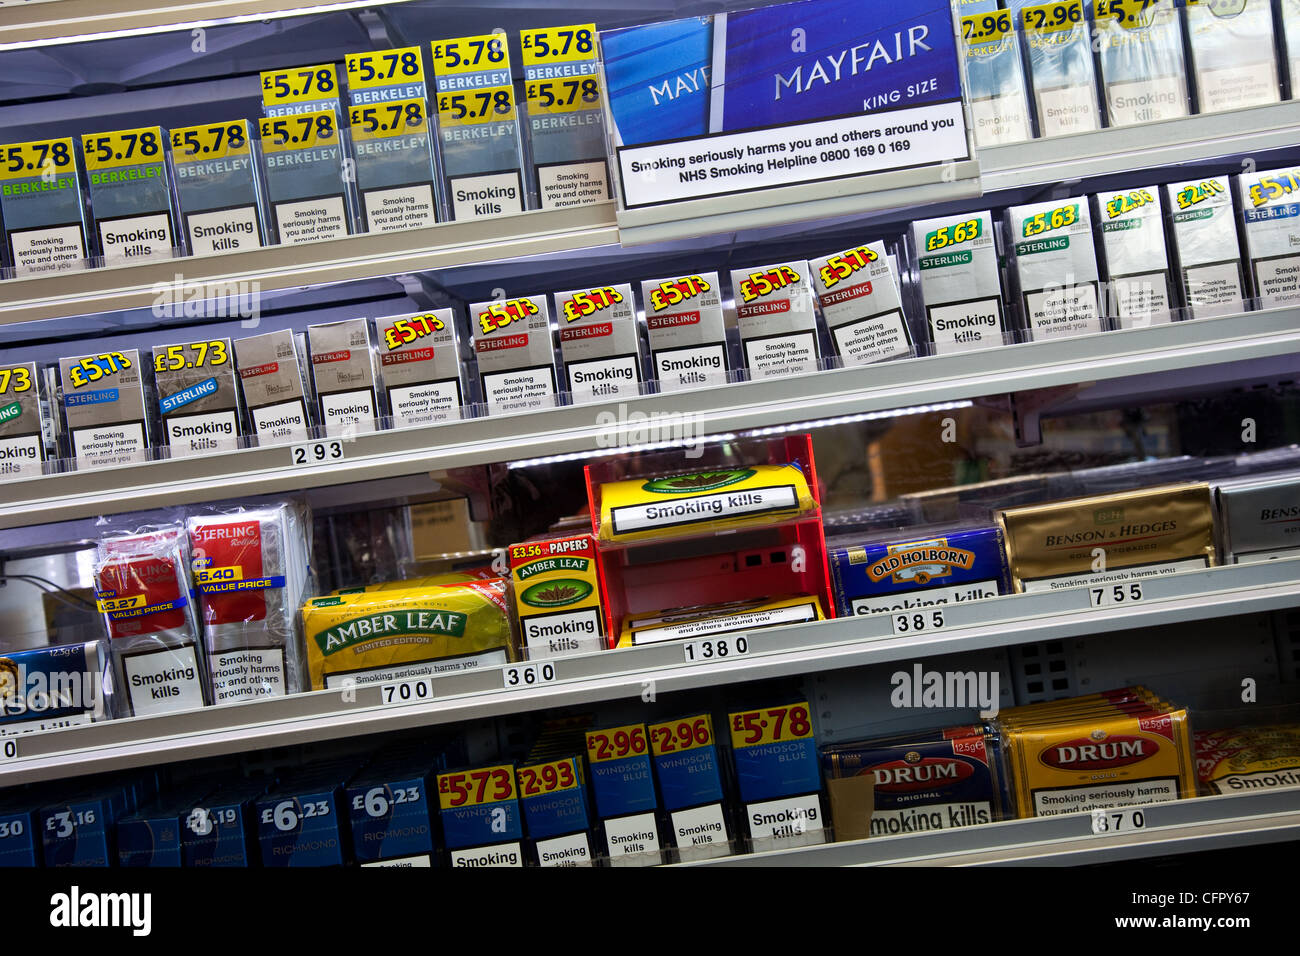 Point of sale cigarettes and Tobacco for sale   2012 Shop Display of cigarette packets of priced smoking products, UK Stock Photo